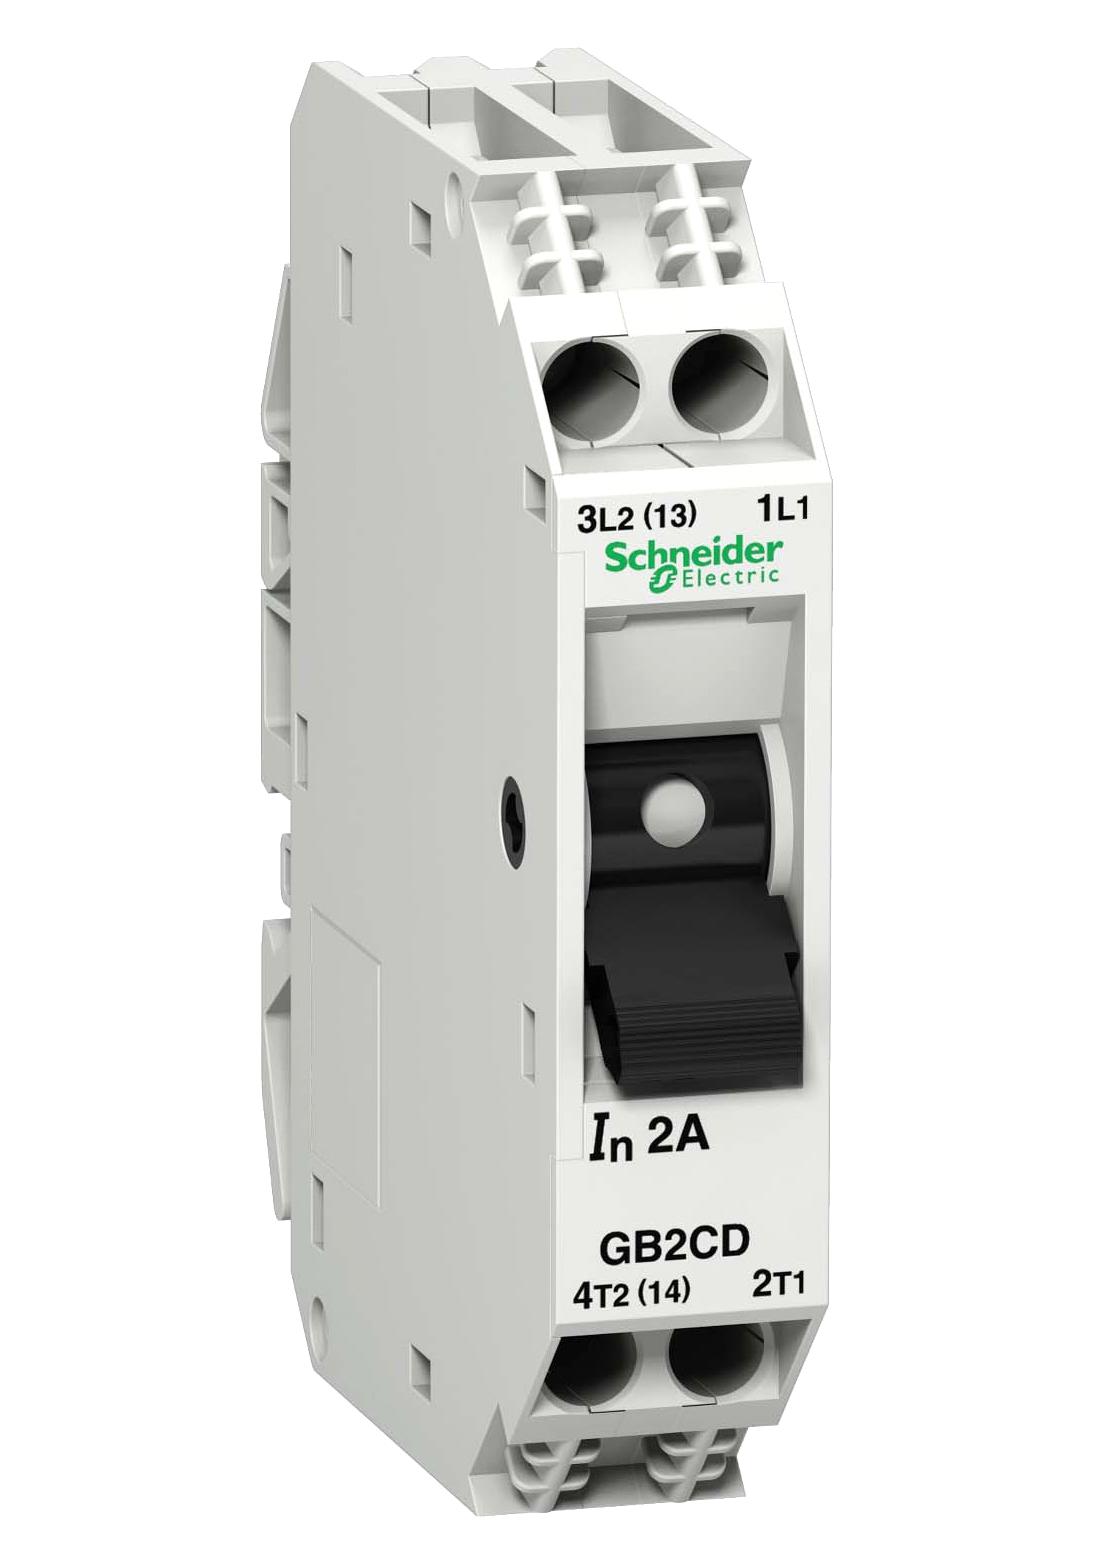 GB2CD12 THERMOMAGNETIC CKT BREAKER, 1P, 6A SCHNEIDER ELECTRIC